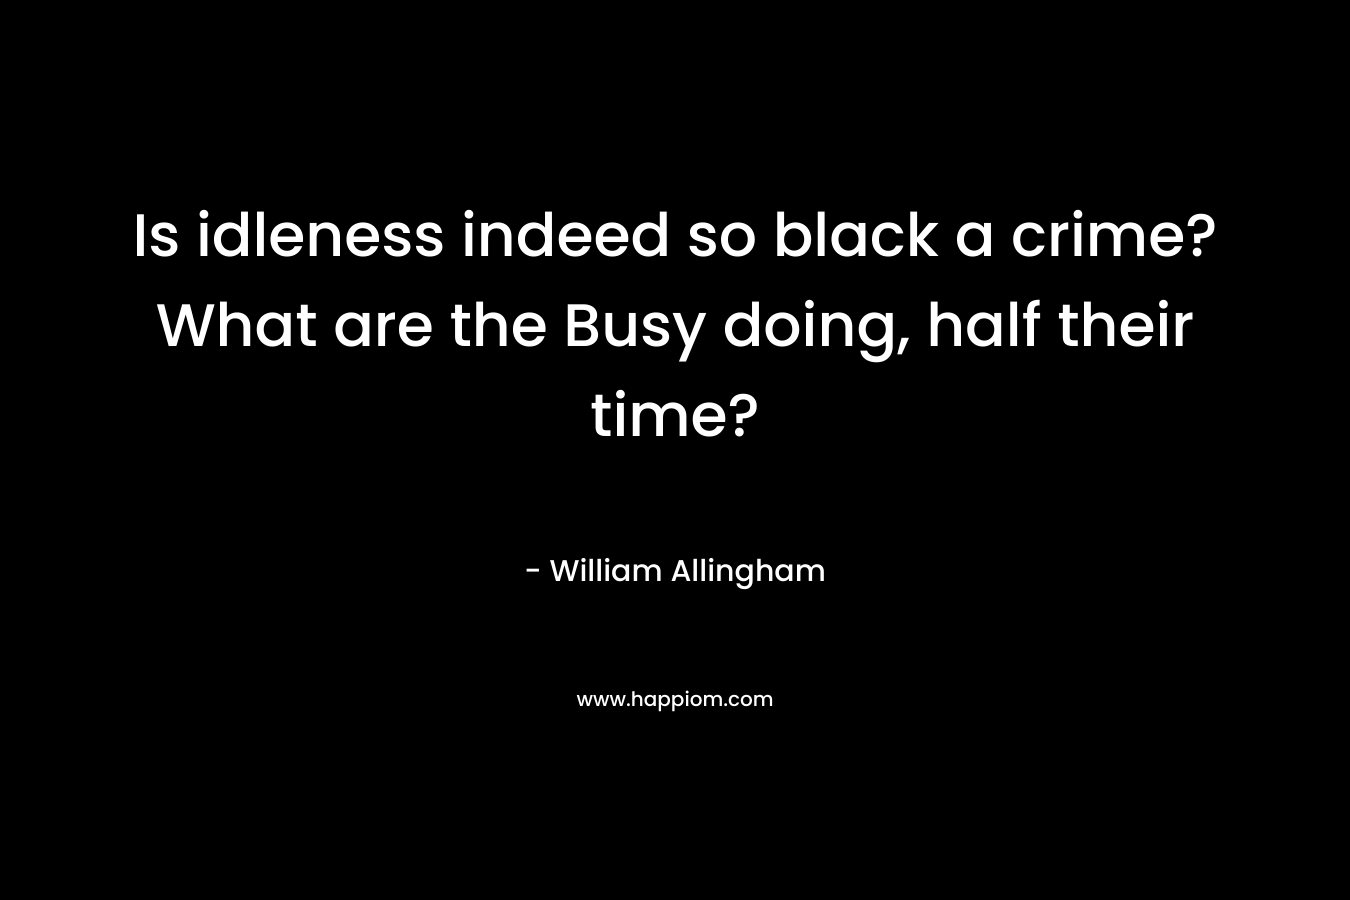 Is idleness indeed so black a crime?What are the Busy doing, half their time?